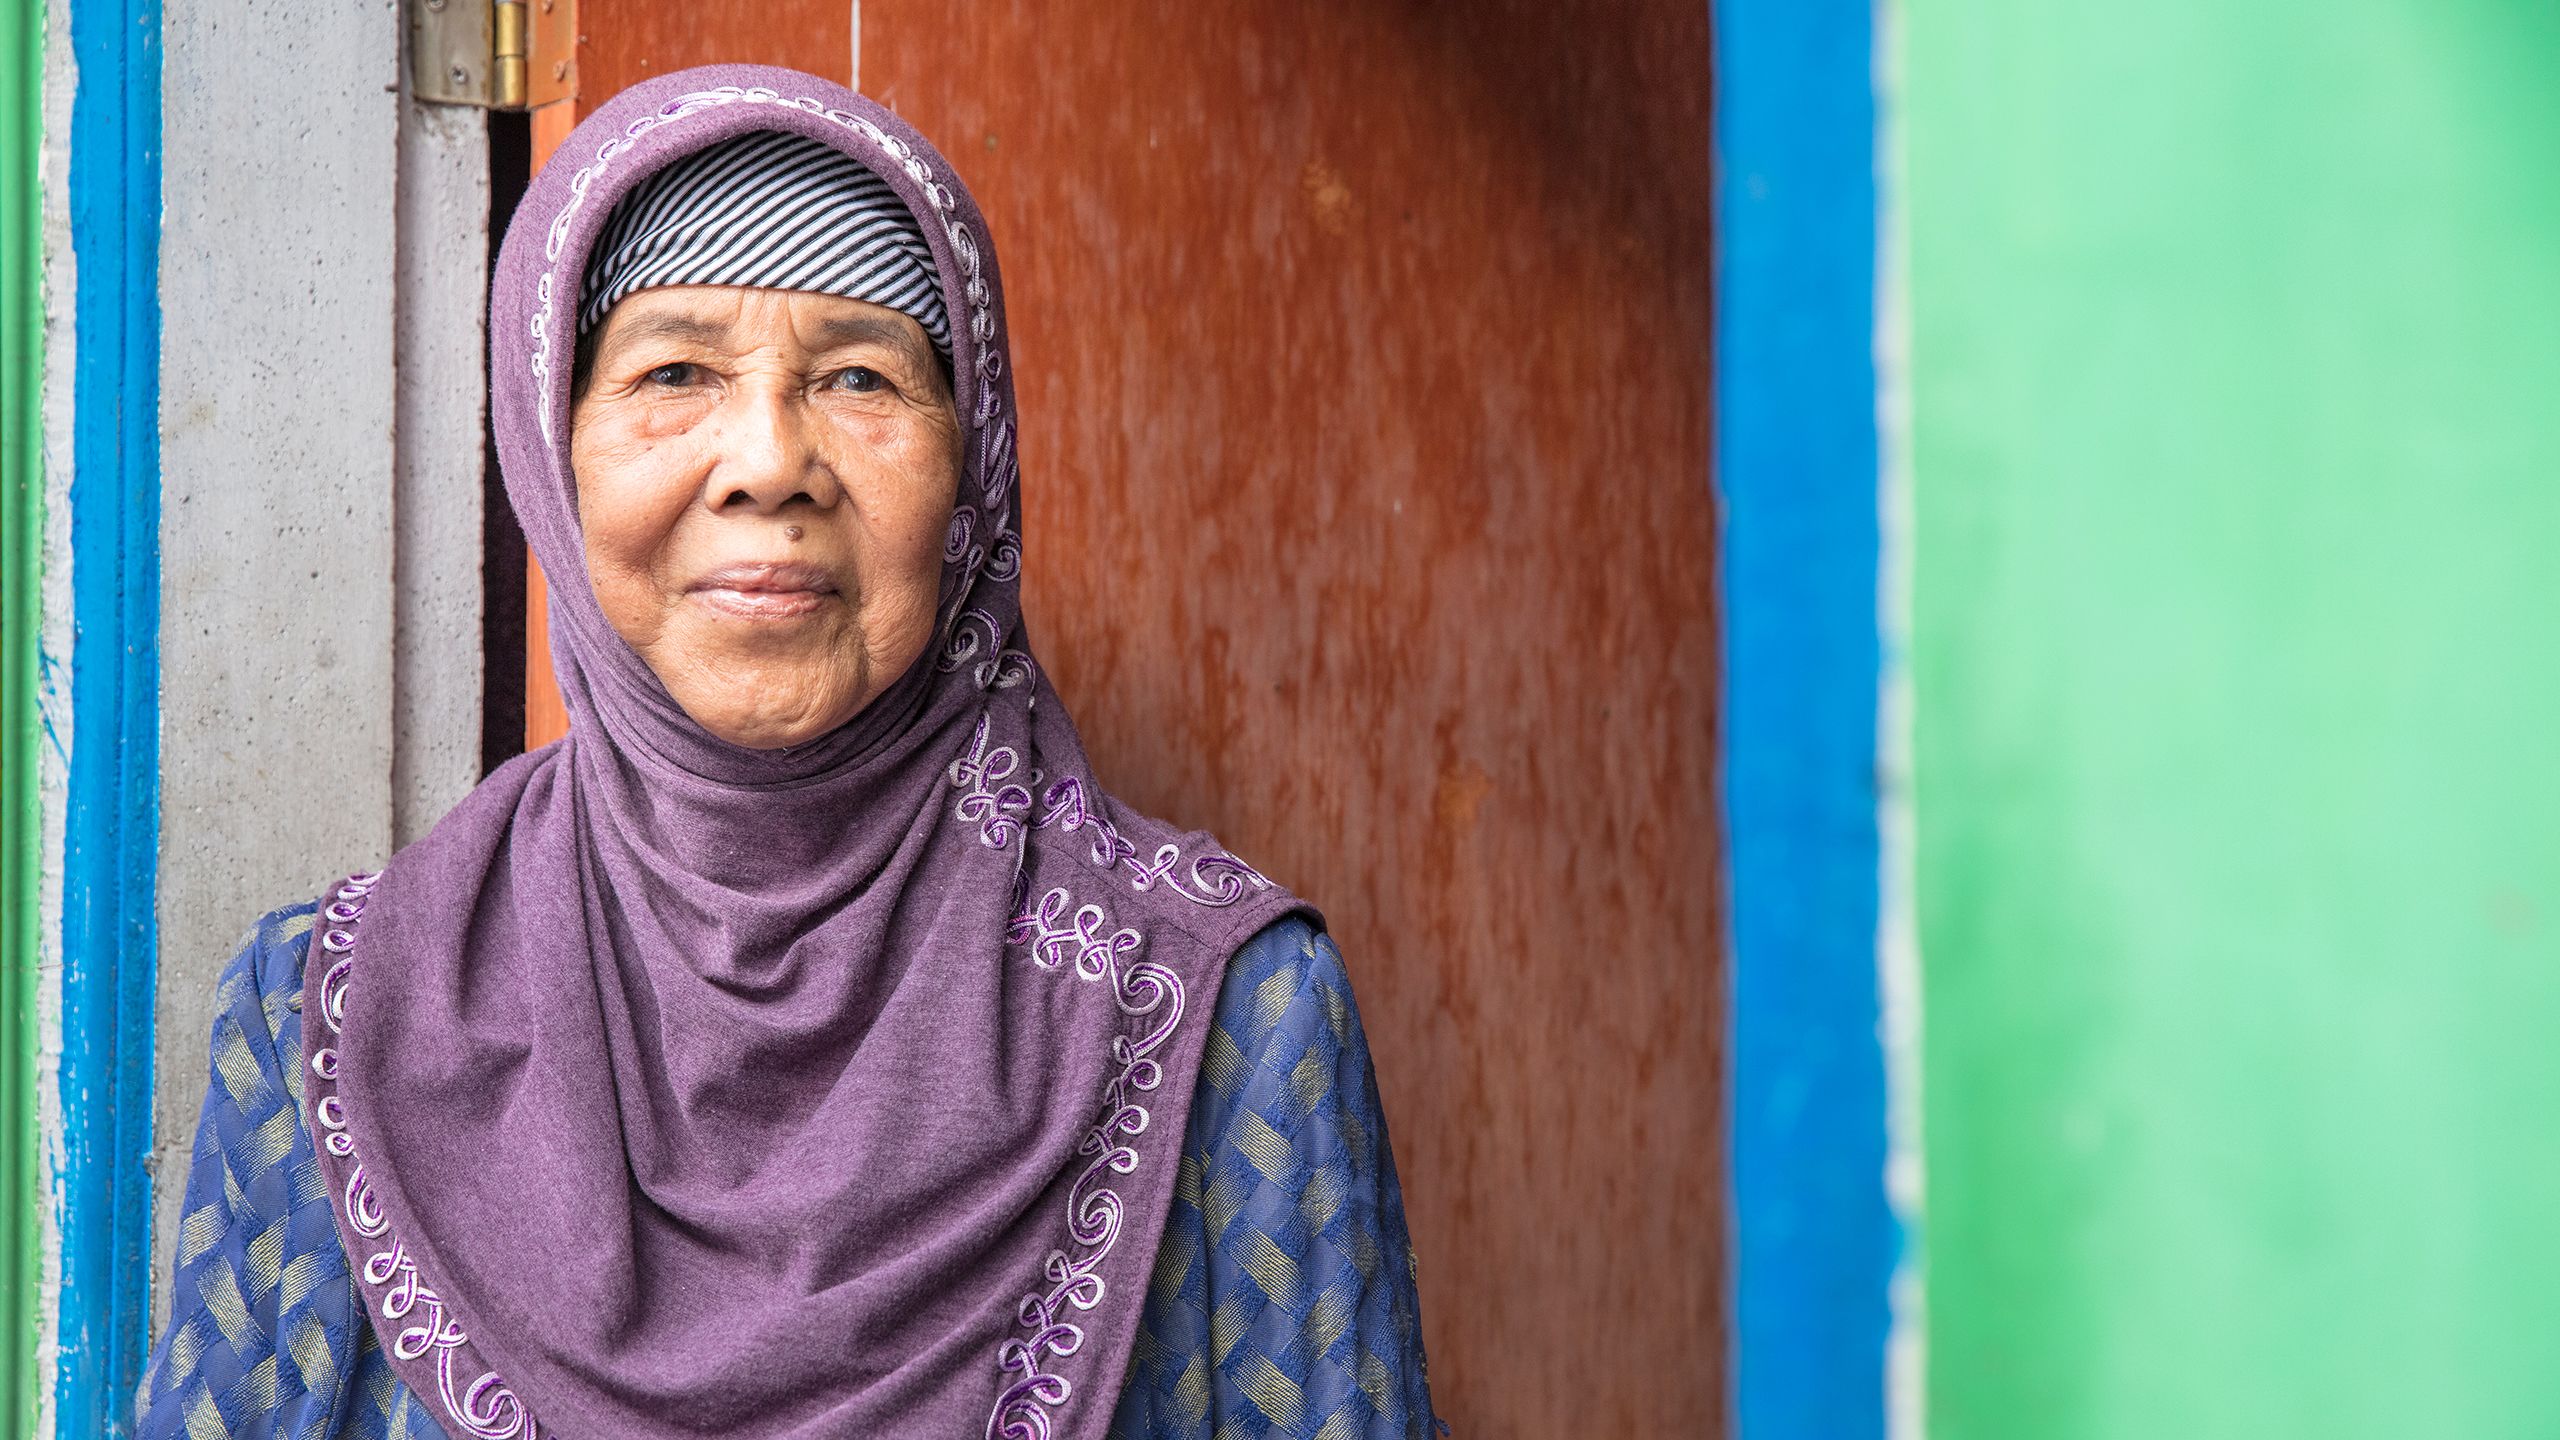 Lusiati, an older woman in a purple headscarf, stands proudly in the doorway of her Habitat house.